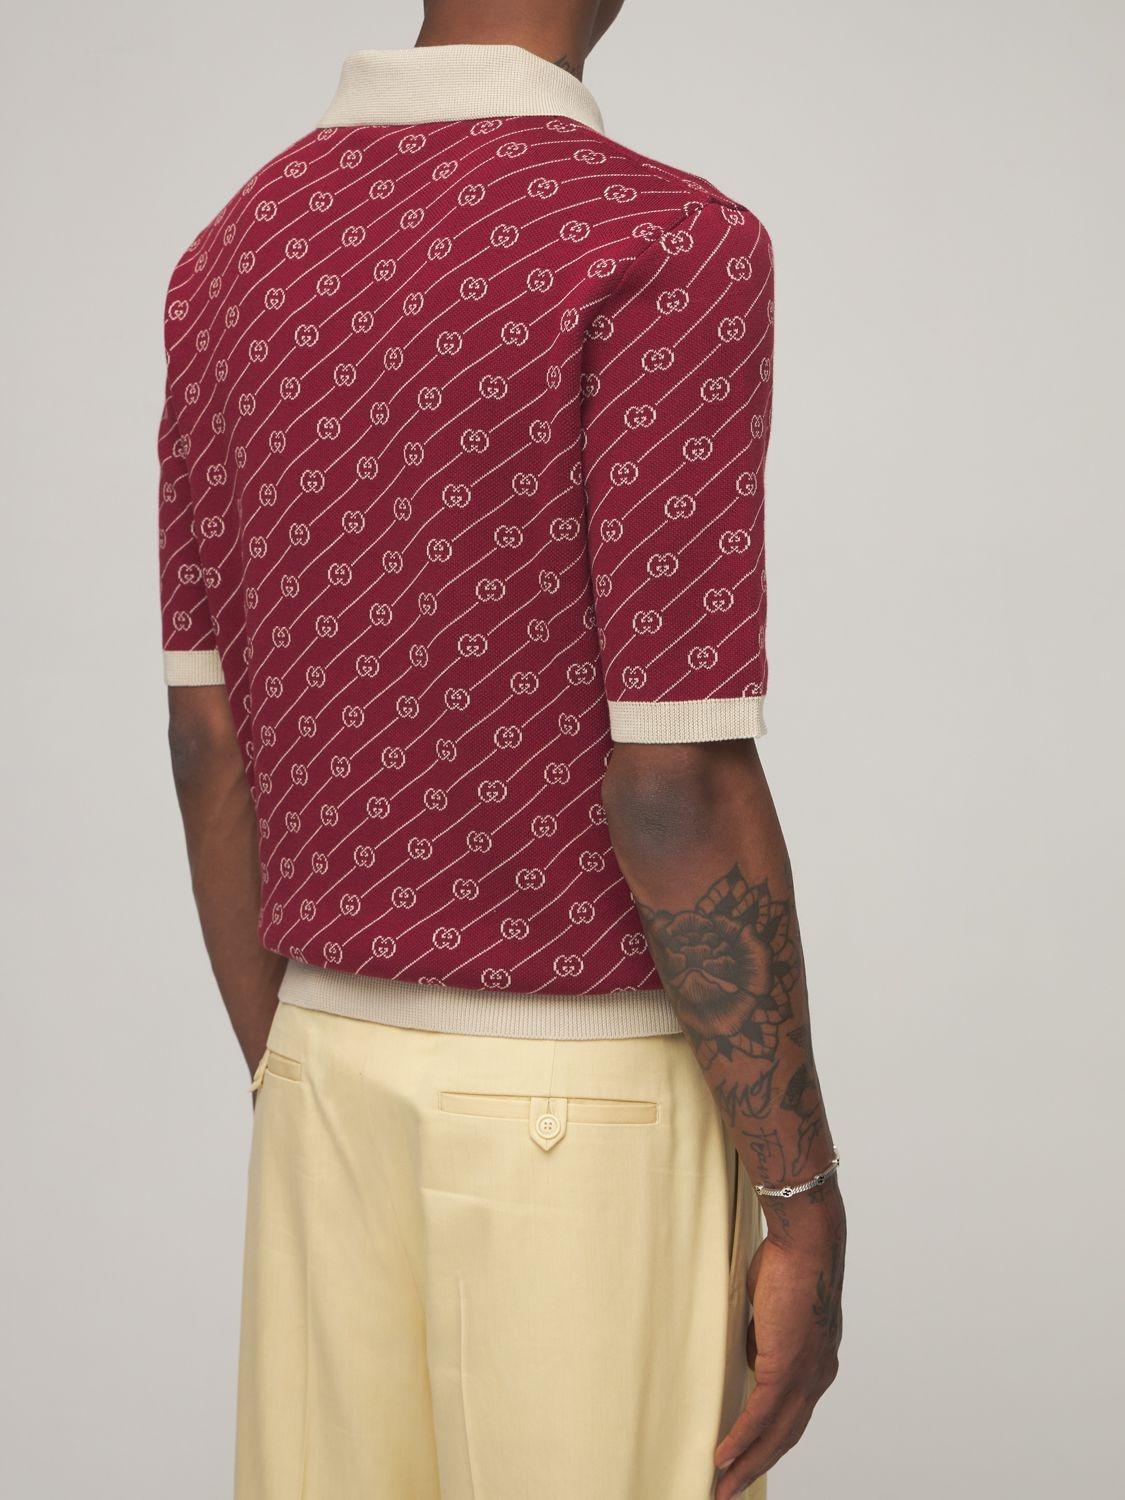 Gucci Gg Diagonal Silk Jacquard Polo in Bordeaux (Red) for Men - Lyst